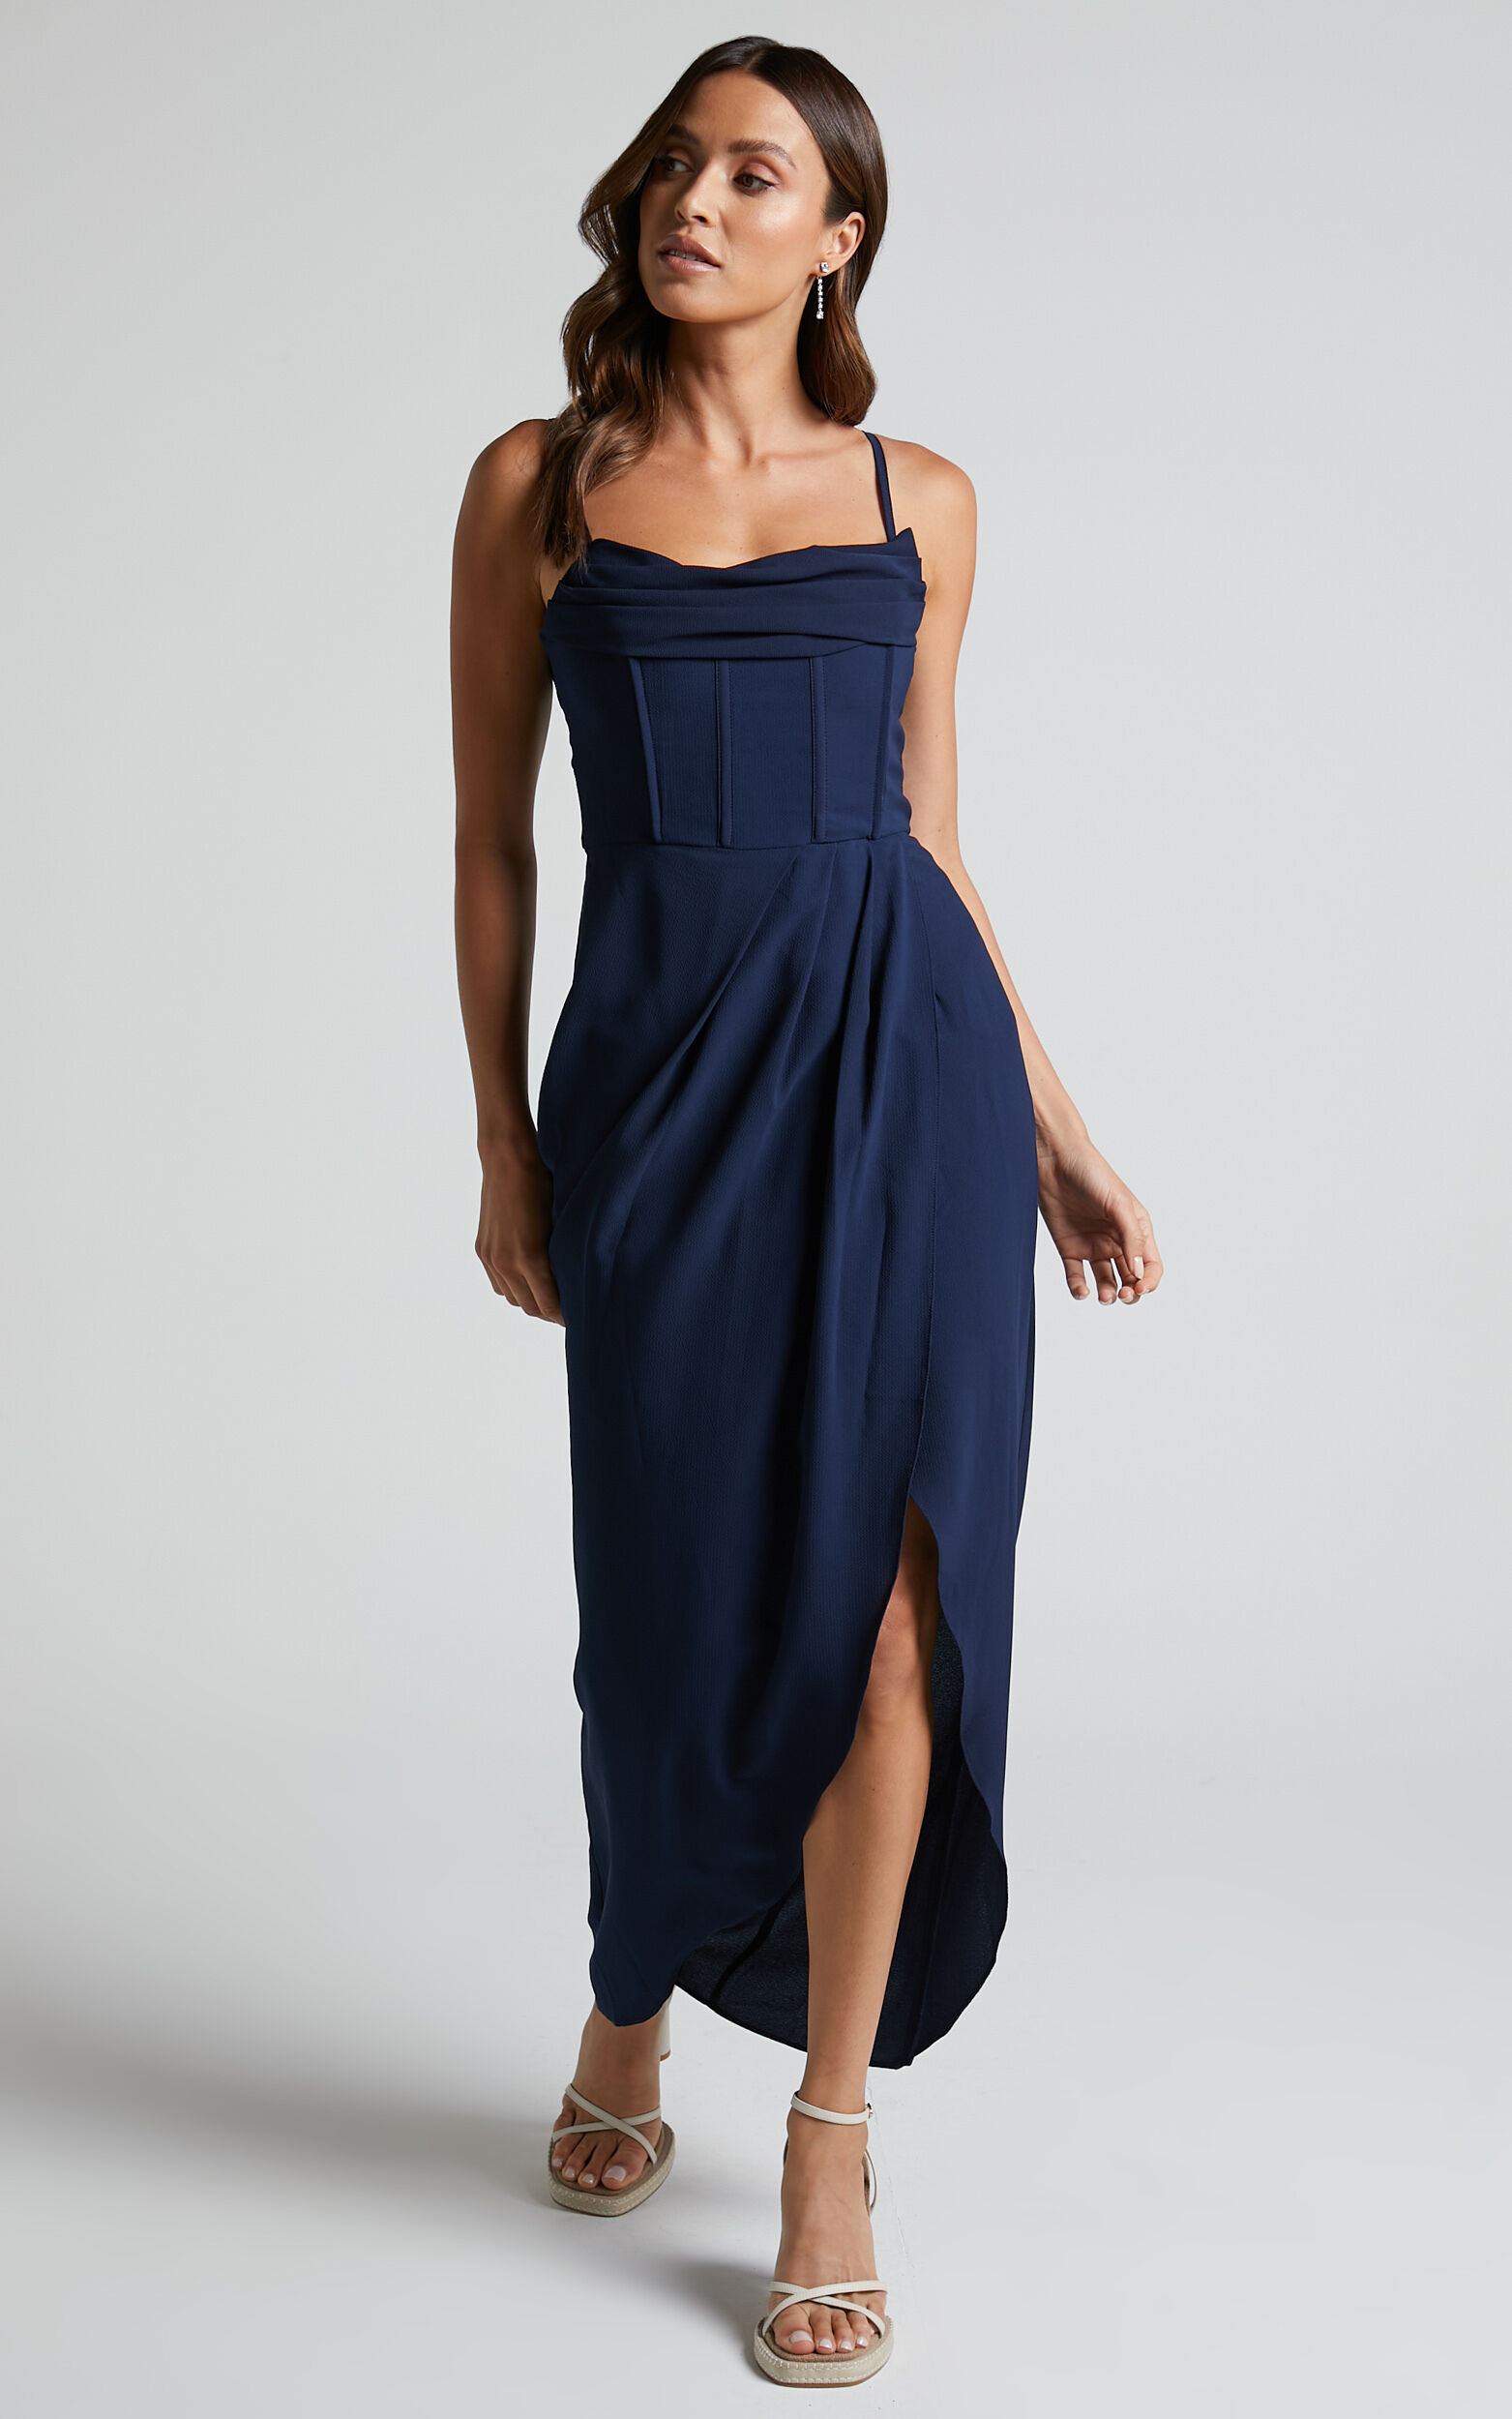 Andrina Midi Dress -  High Low Wrap Corset Dress in Navy - 04, NVY1, super-hi-res image number null